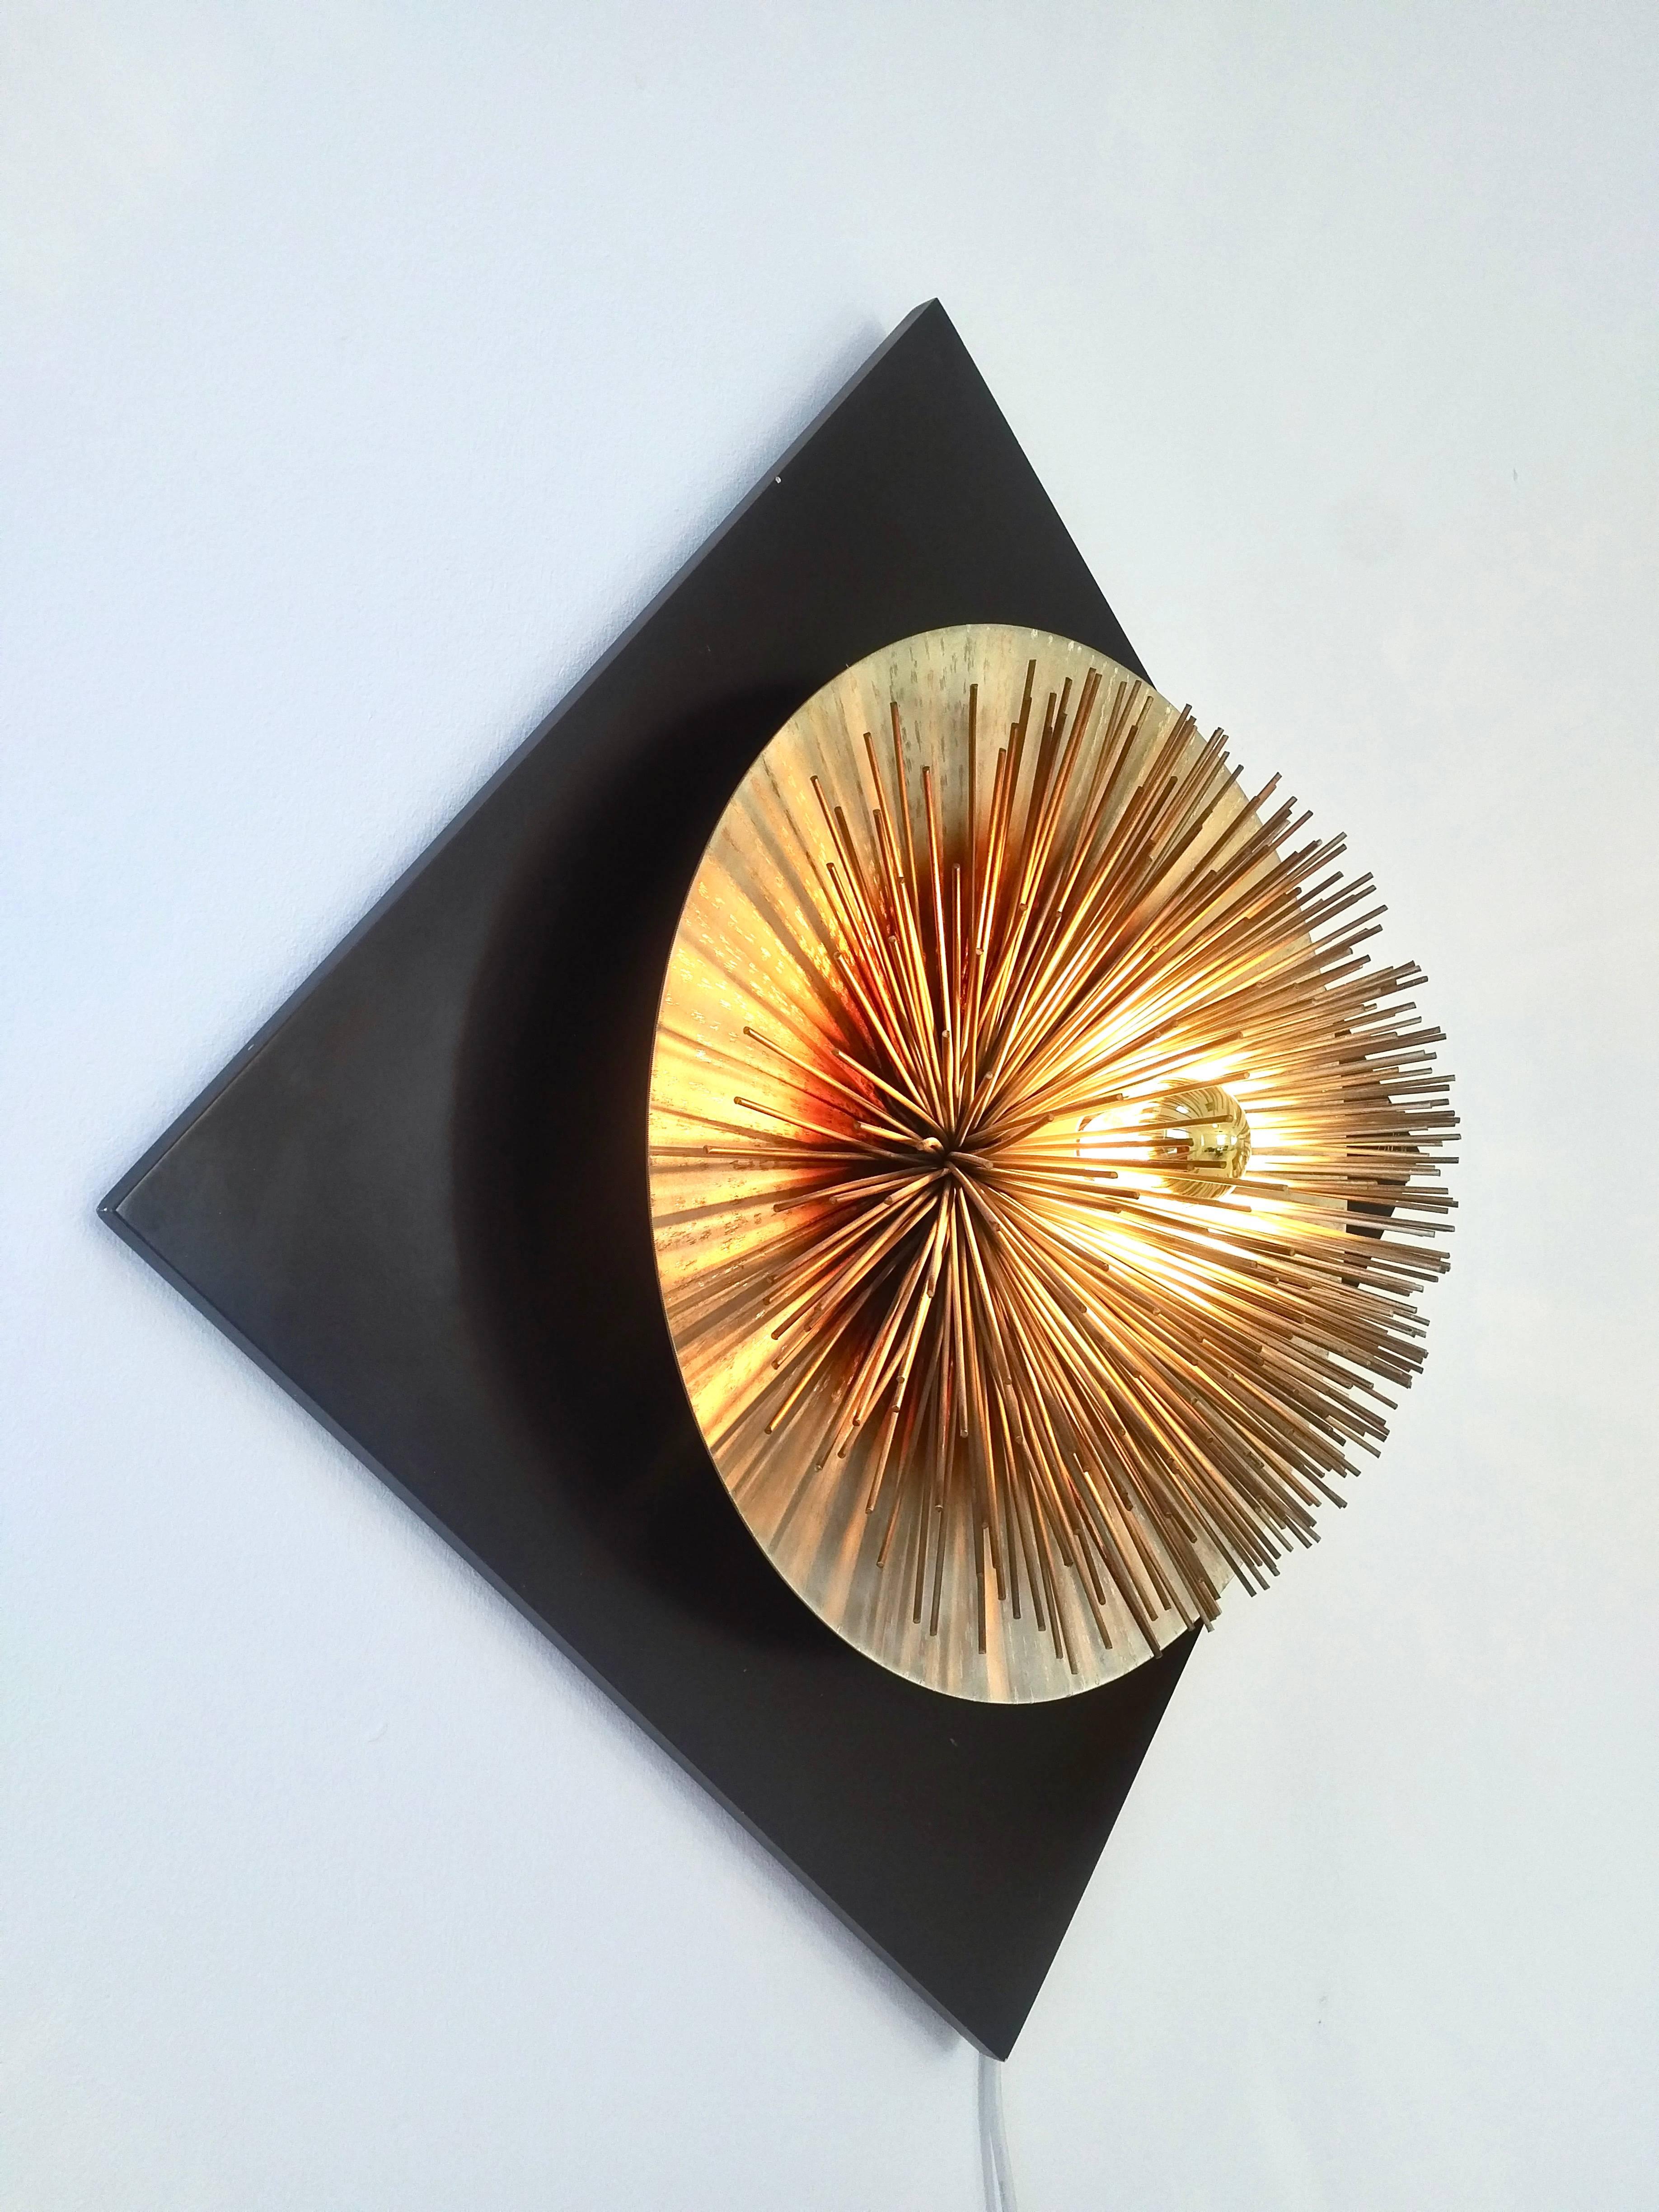 Brass and metal 'Aurora' light sculpture from the series 'Hit Proposals' ; produced between 1974-1975. This series was conceived and produced by Studio EF, Viareggio, Italy.
The brushed metal disc mounted on a lacquered wooden panel is covered in